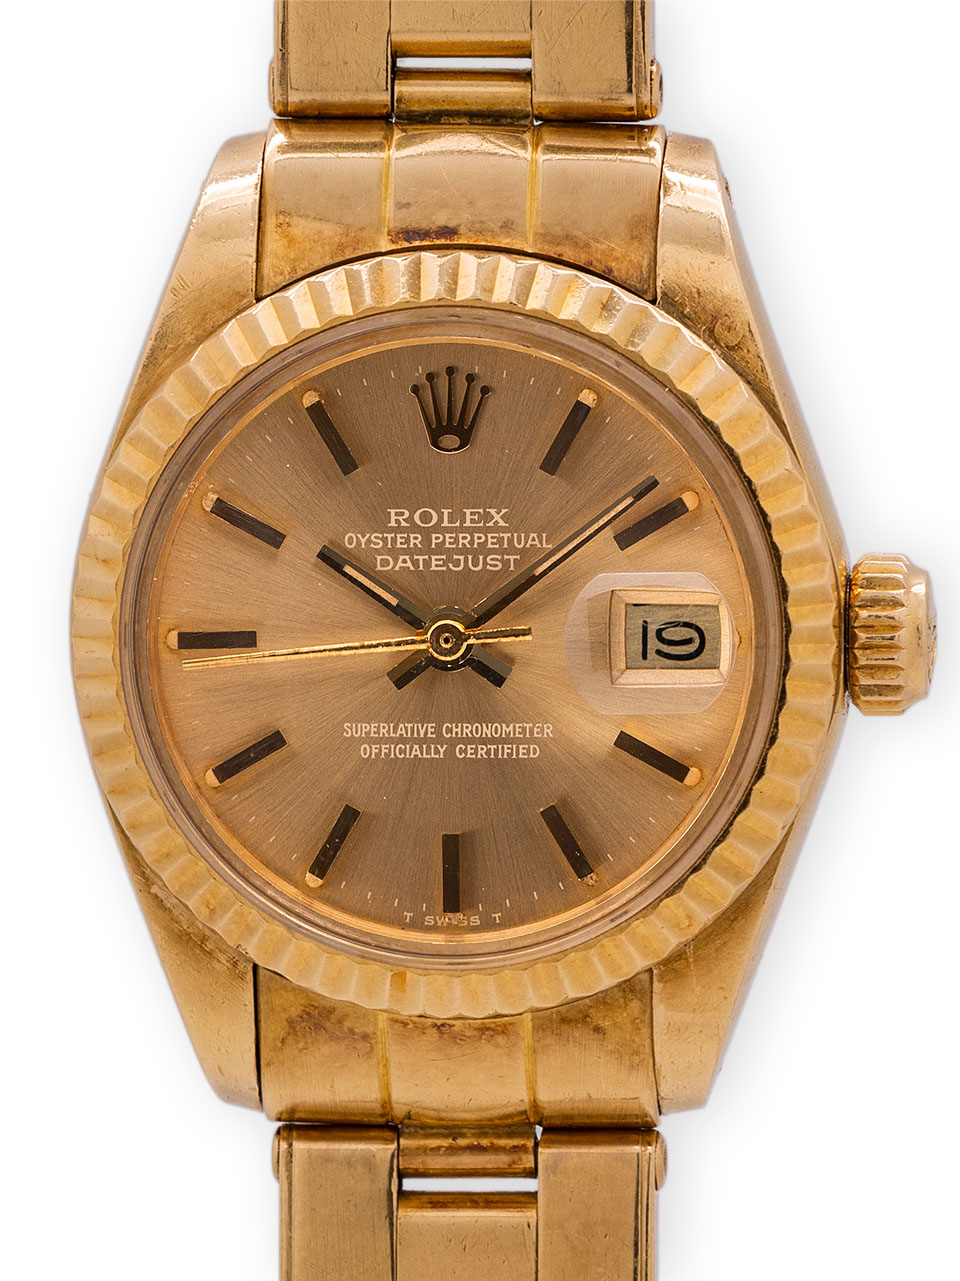 Rolex Oyster Perpetual Date for Rs.297,148 for sale from a Private Seller  on Chrono24